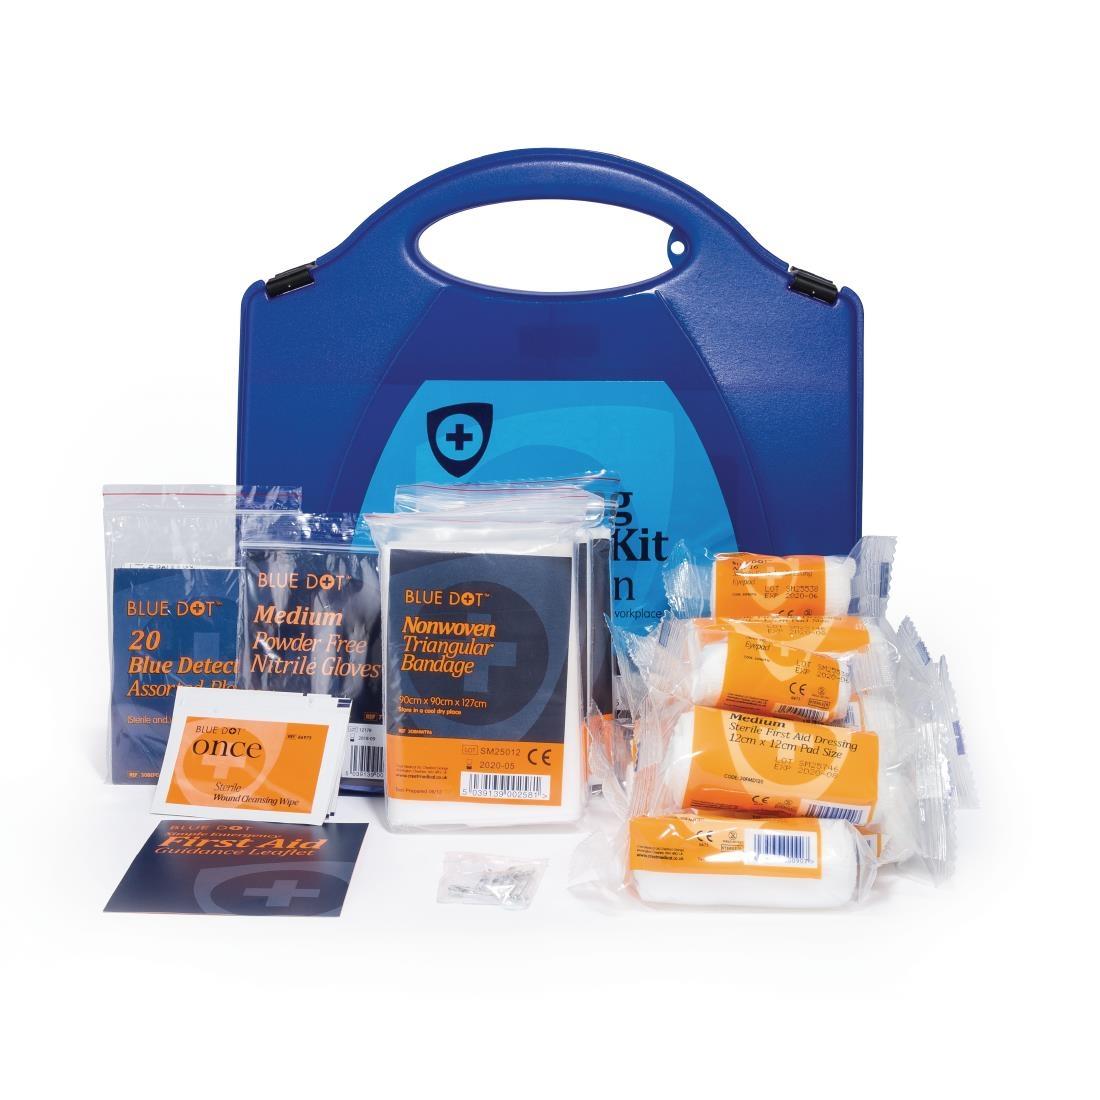 Vogue HSE First Aid Kit Catering 10 person - GK093  - 3